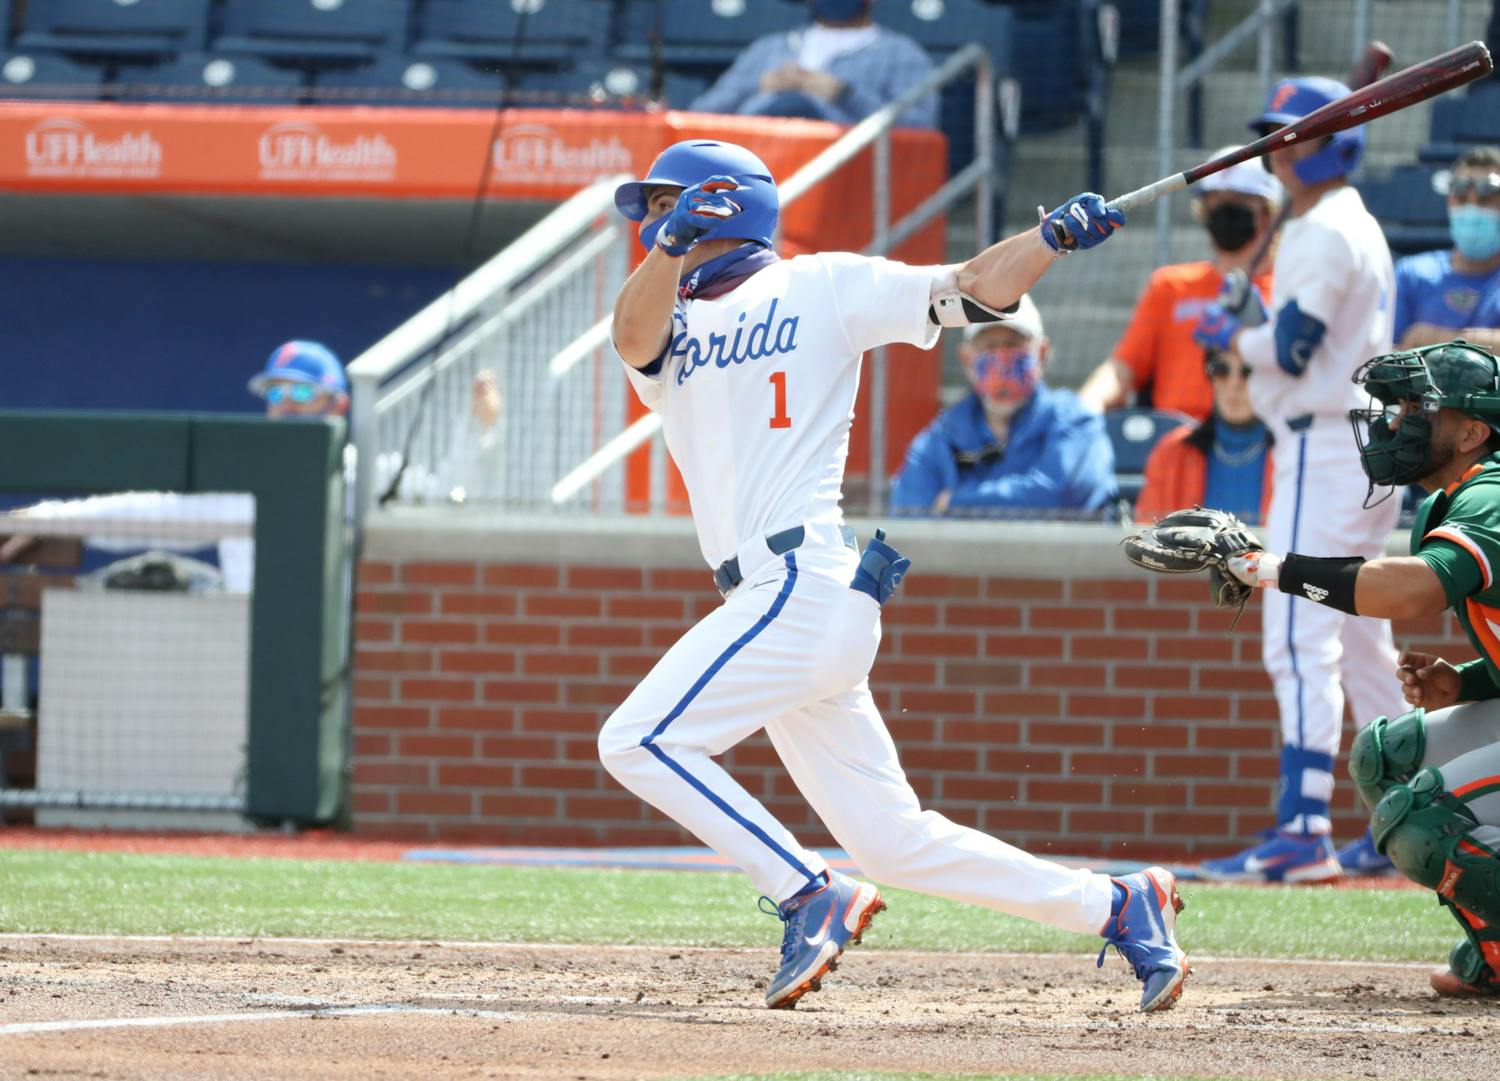 Jacob Young brought in his first RBI with a 2nd-inning double to bring the Gators a lead in the third game against Samford. Photo from UF-Miami game Feb. 21. Courtesy of the SEC Media Portal.